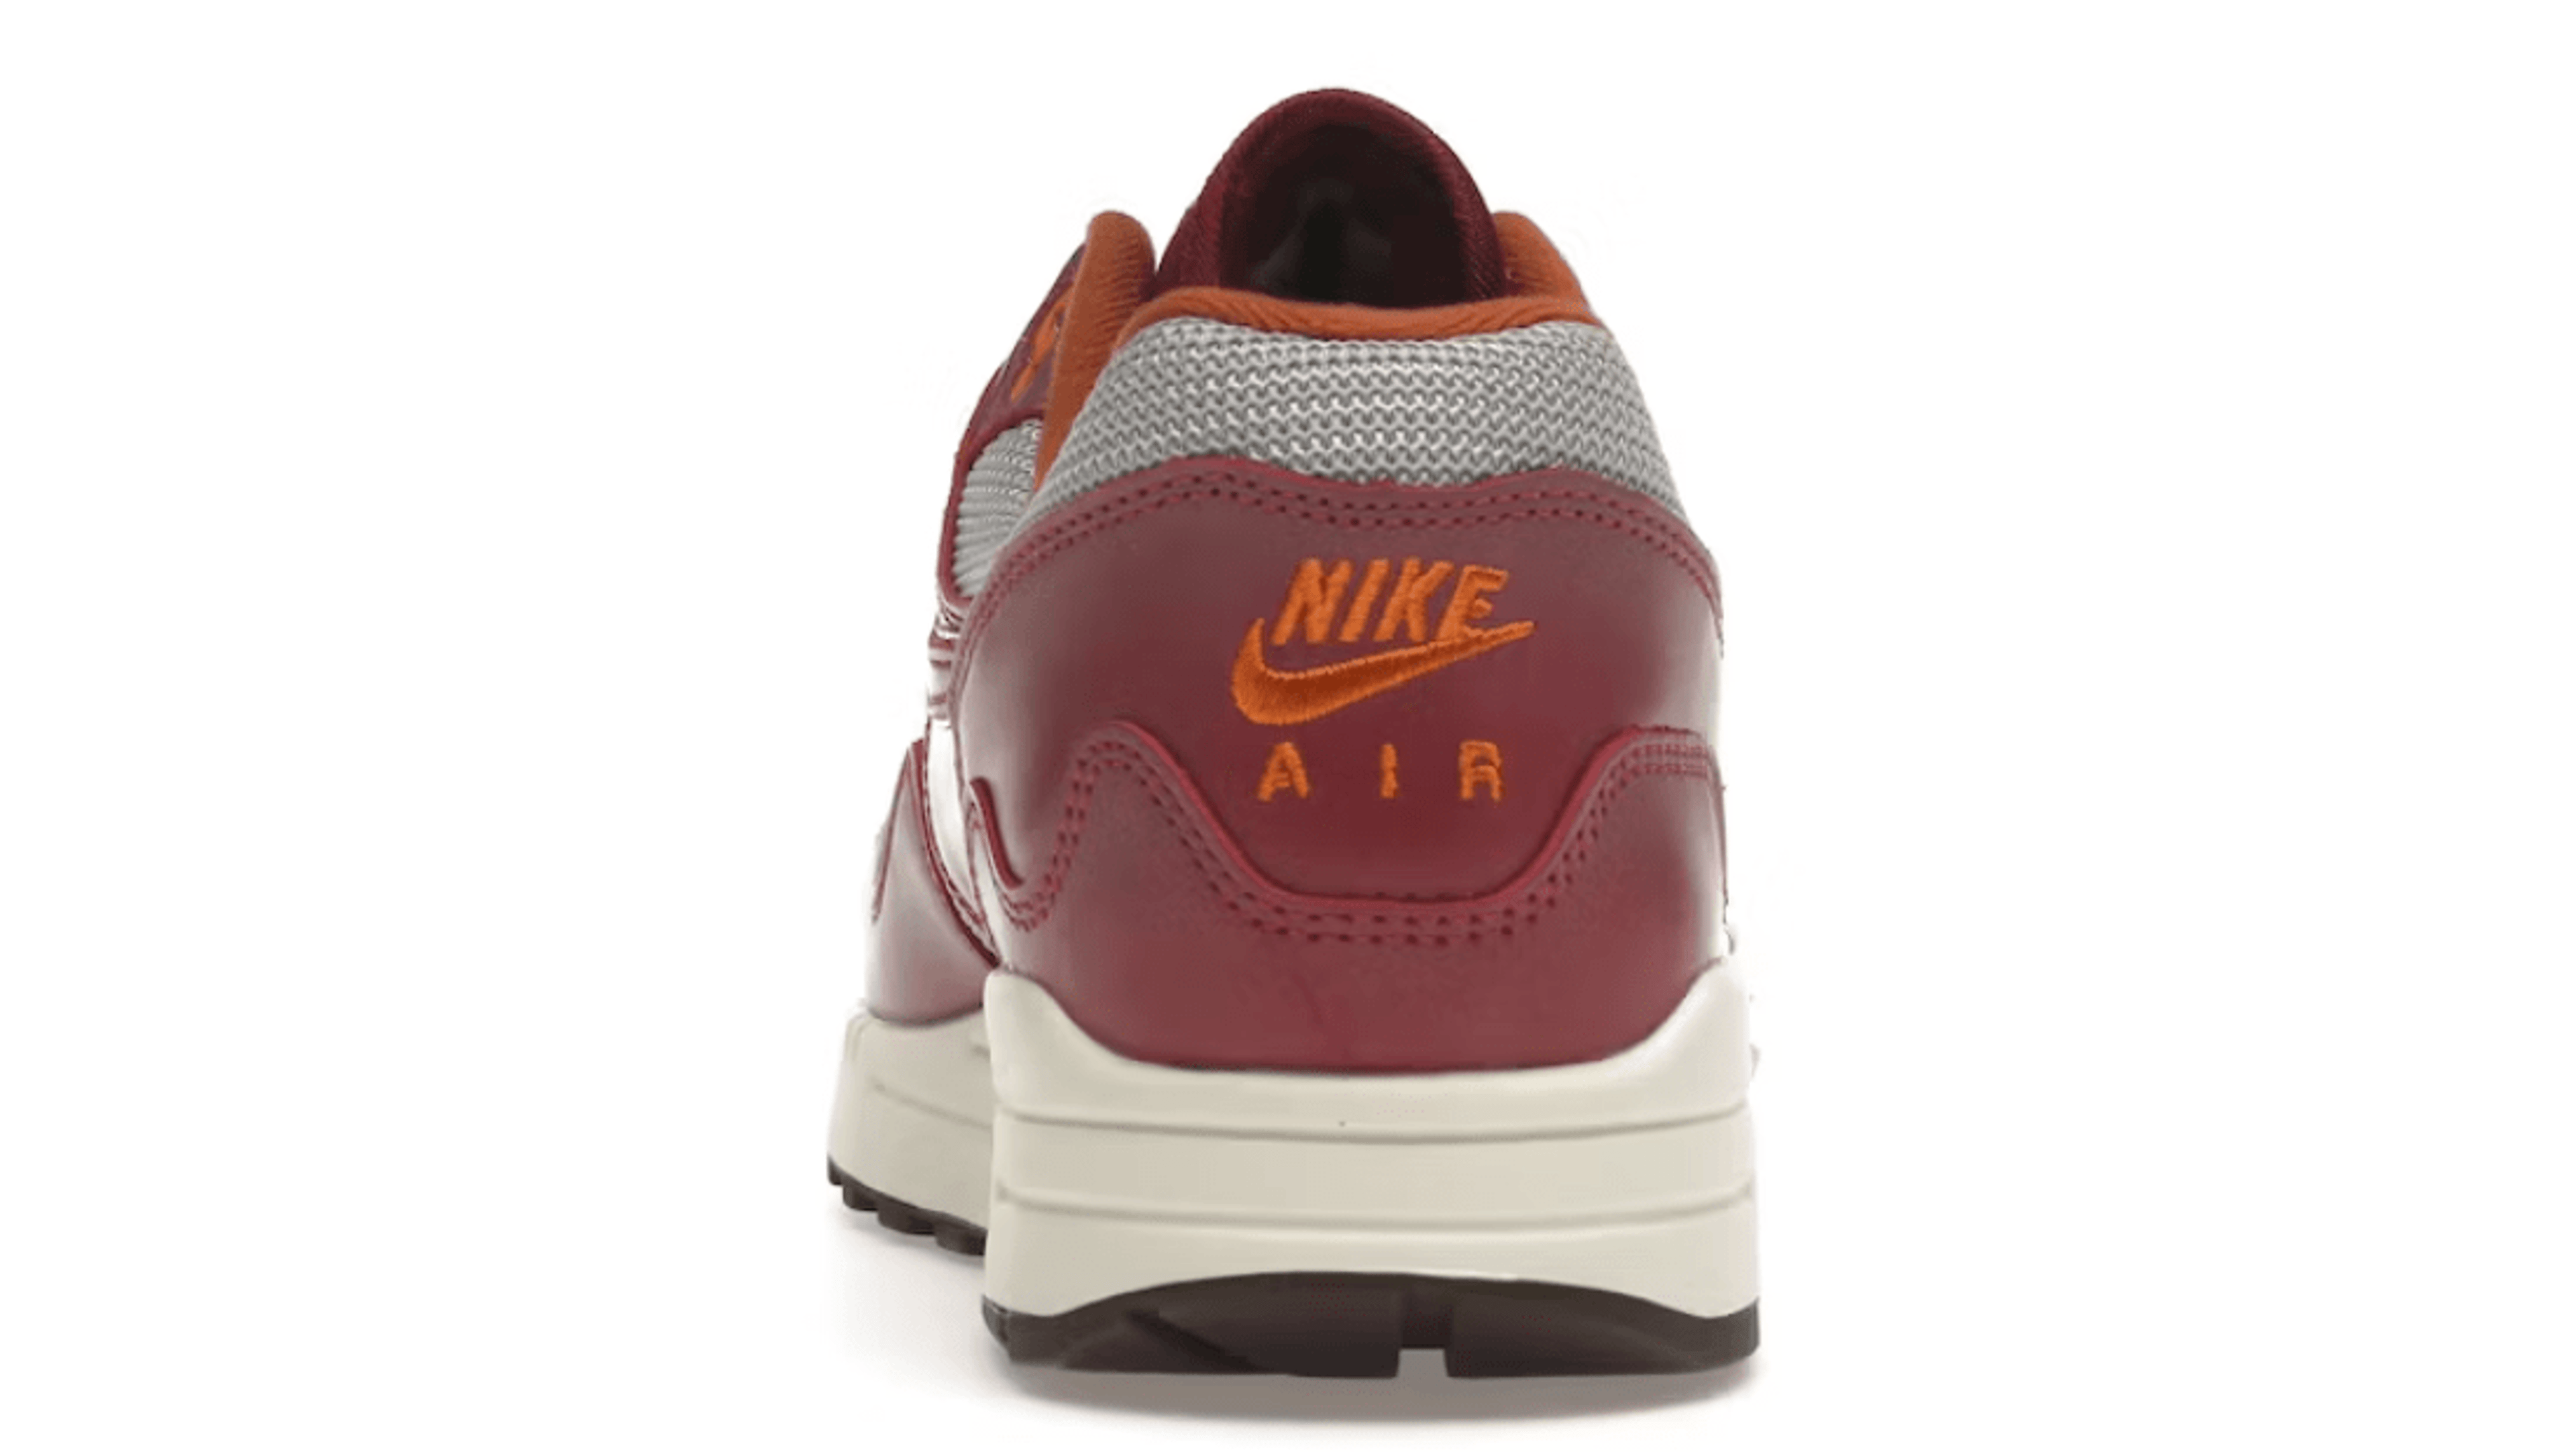 Alternate View 3 of Nike Air Max 1 Patta Waves Rush Maroon (with Bracelet)